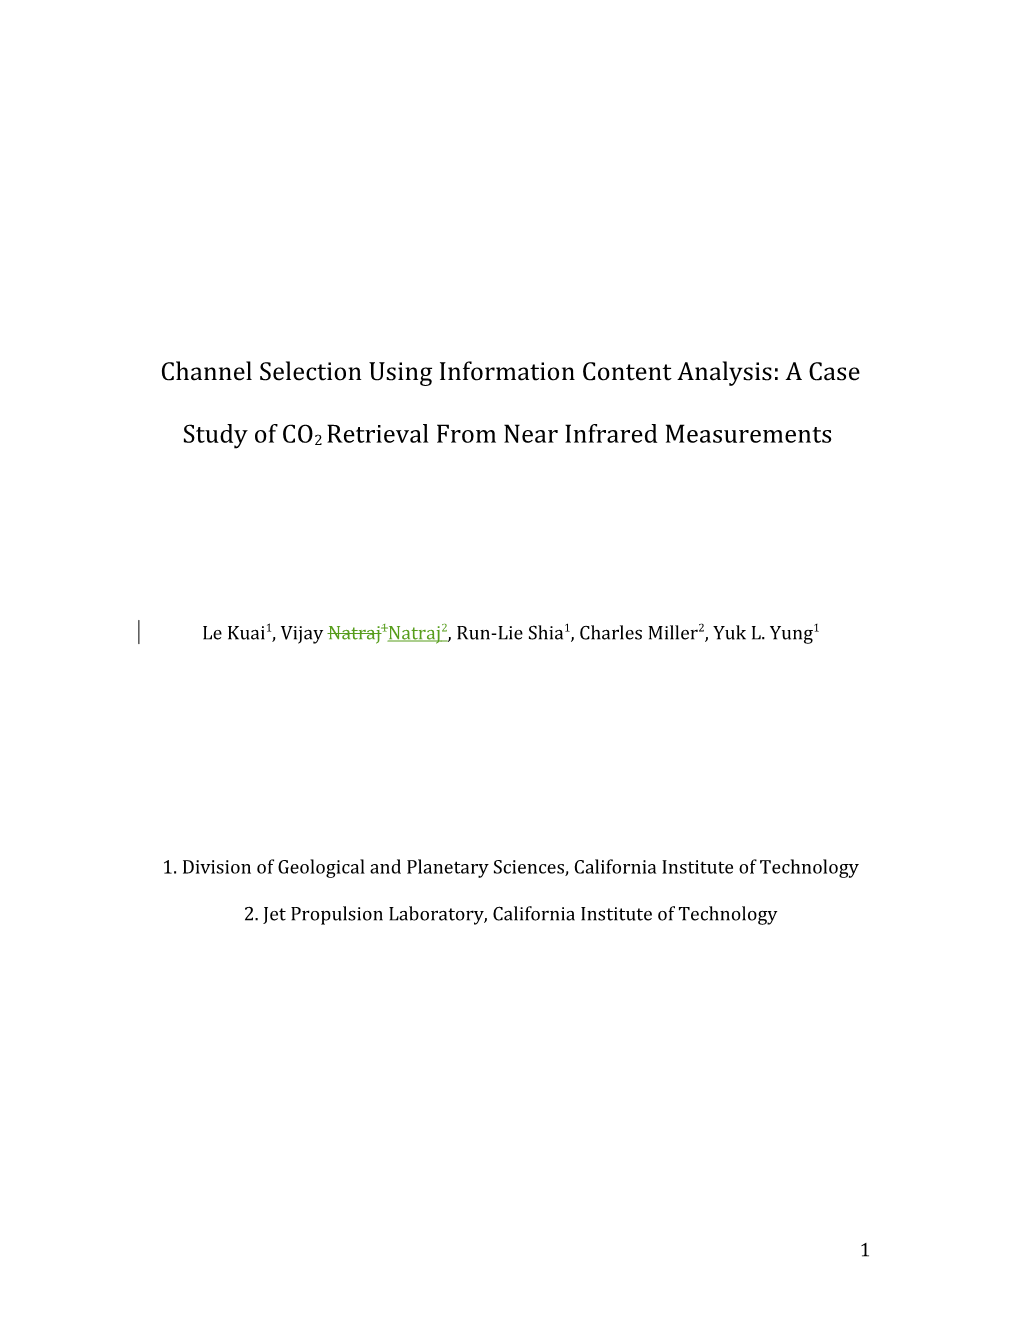 Channel Selection Using Information Content Analysis: a Case Study of CO2 Retrieval From